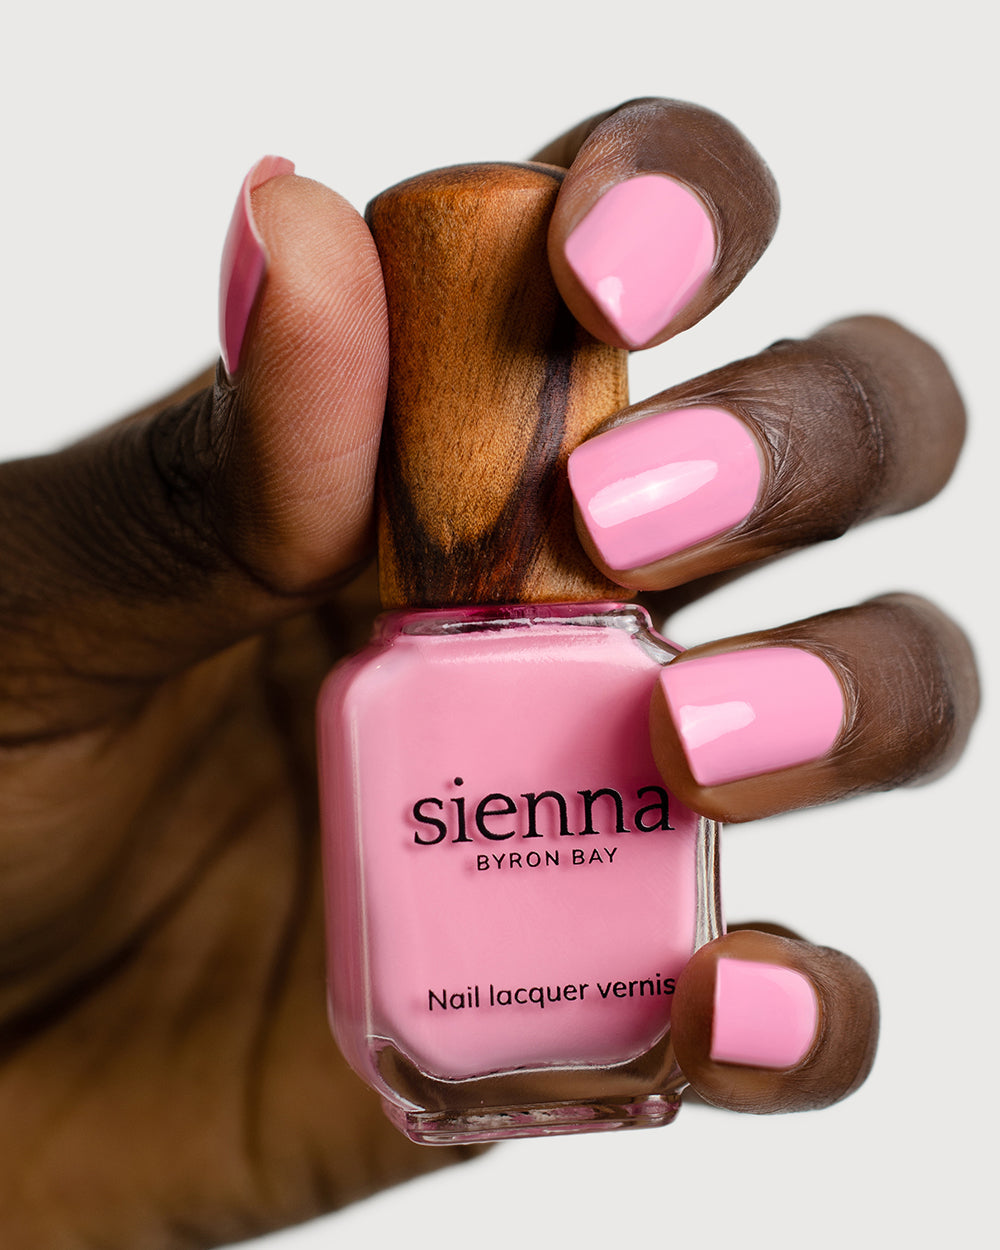 Classic lolly pink nail polish hand swatch on dark skin tone holding sienna bottle close-up